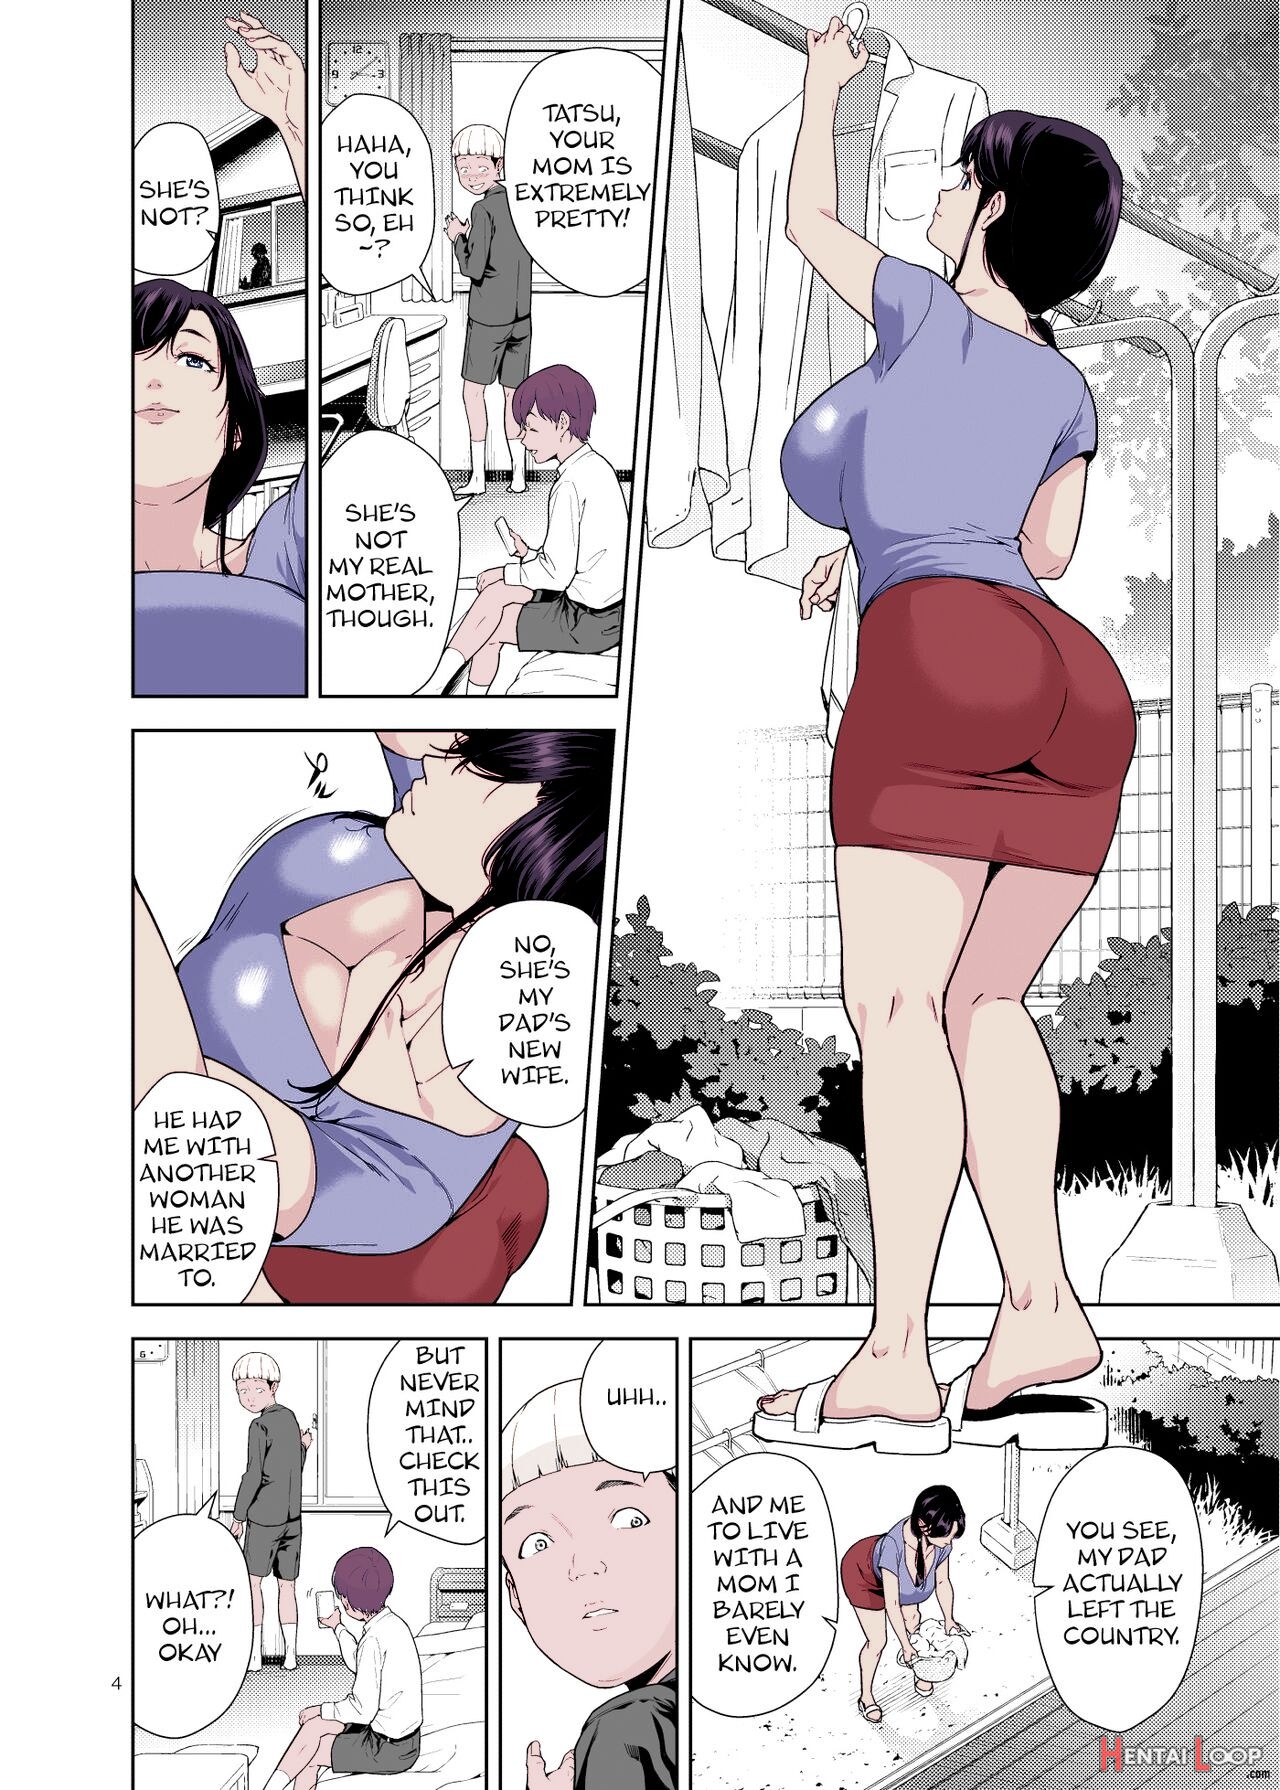 Page 3 of My 'best' Friend's Mother (by Jyura) - Hentai doujinshi for free  at HentaiLoop